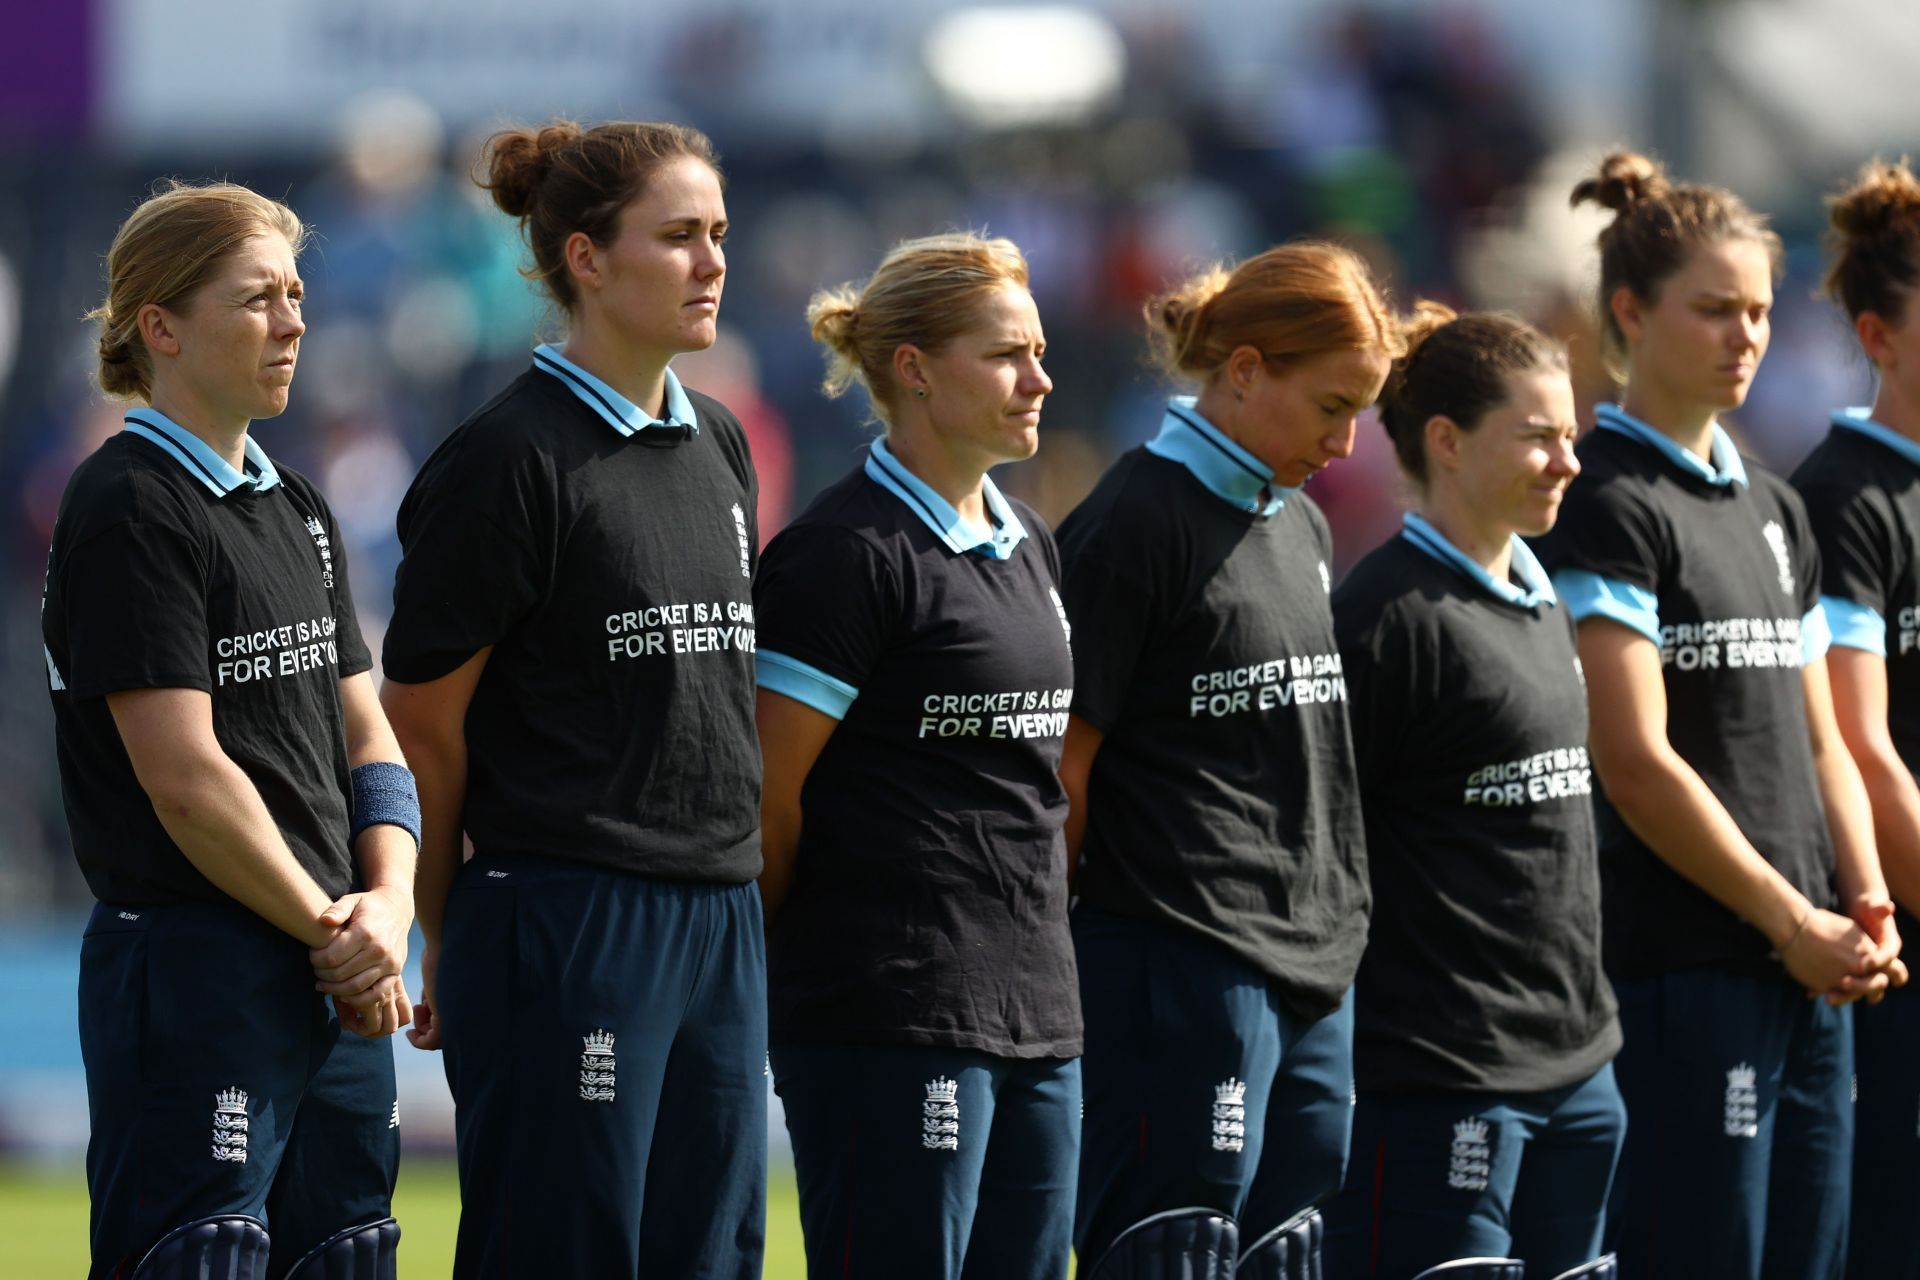 Heather Knight (L) will lead England Women in the tour of Australia next year.